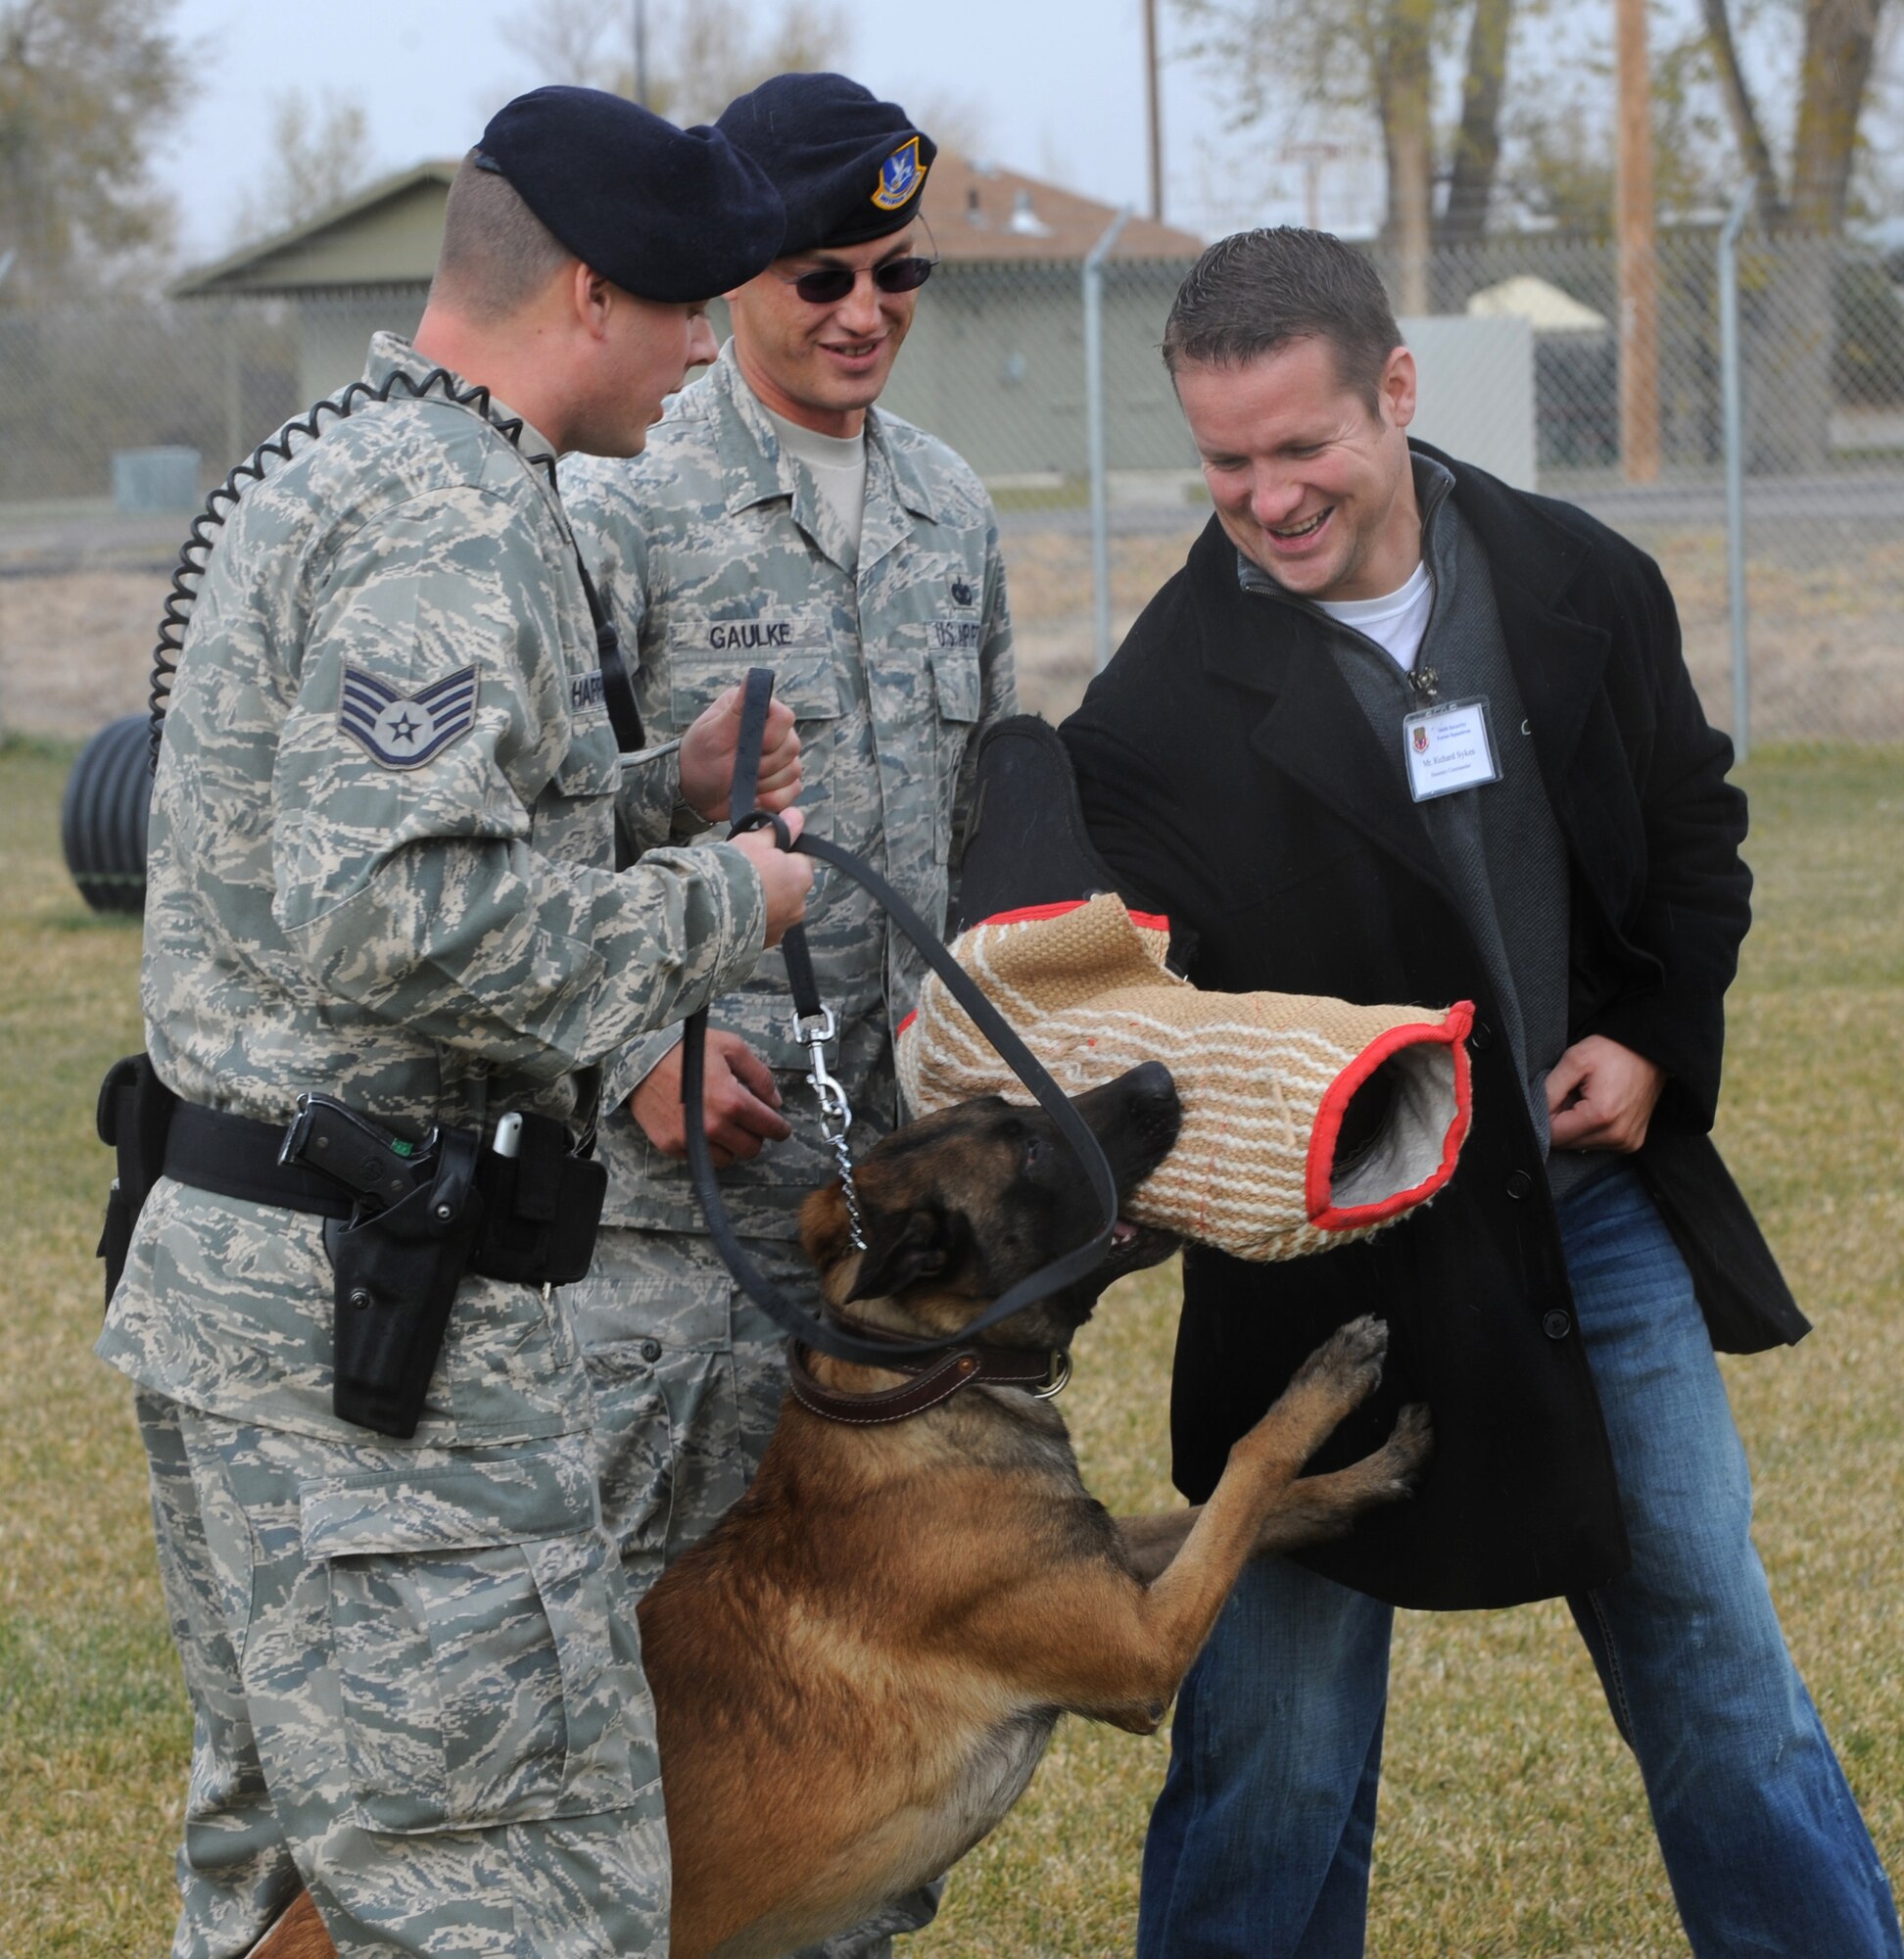 MOUNTAIN HOME AIR FORCE BASE, Idaho -- Rich Sykes, 366th Security Forces Squadron honorary commander, serves as an attack subject as Staff Sgt. Joshua Harrison and Tech. Sgt. William Gaulke, 366th SFS military working dog handlers, stand by the MWD training area as part of a demonstration for the Honorary Commander Mission Support Group Orientation Tour Nov. 6. The honorary commanders program is a wing-level program that pairs civic leaders with squadron, group and wing leaders to enhance the relationships between local communities and the base. It also provides a rare glimpse of life on a military installation to members of neighboring communities -- many of whom have no connection to the Air Force or prior knowledge of the military. (U.S. Air Force photo by Airman 1st Class Debbie Lockhart)